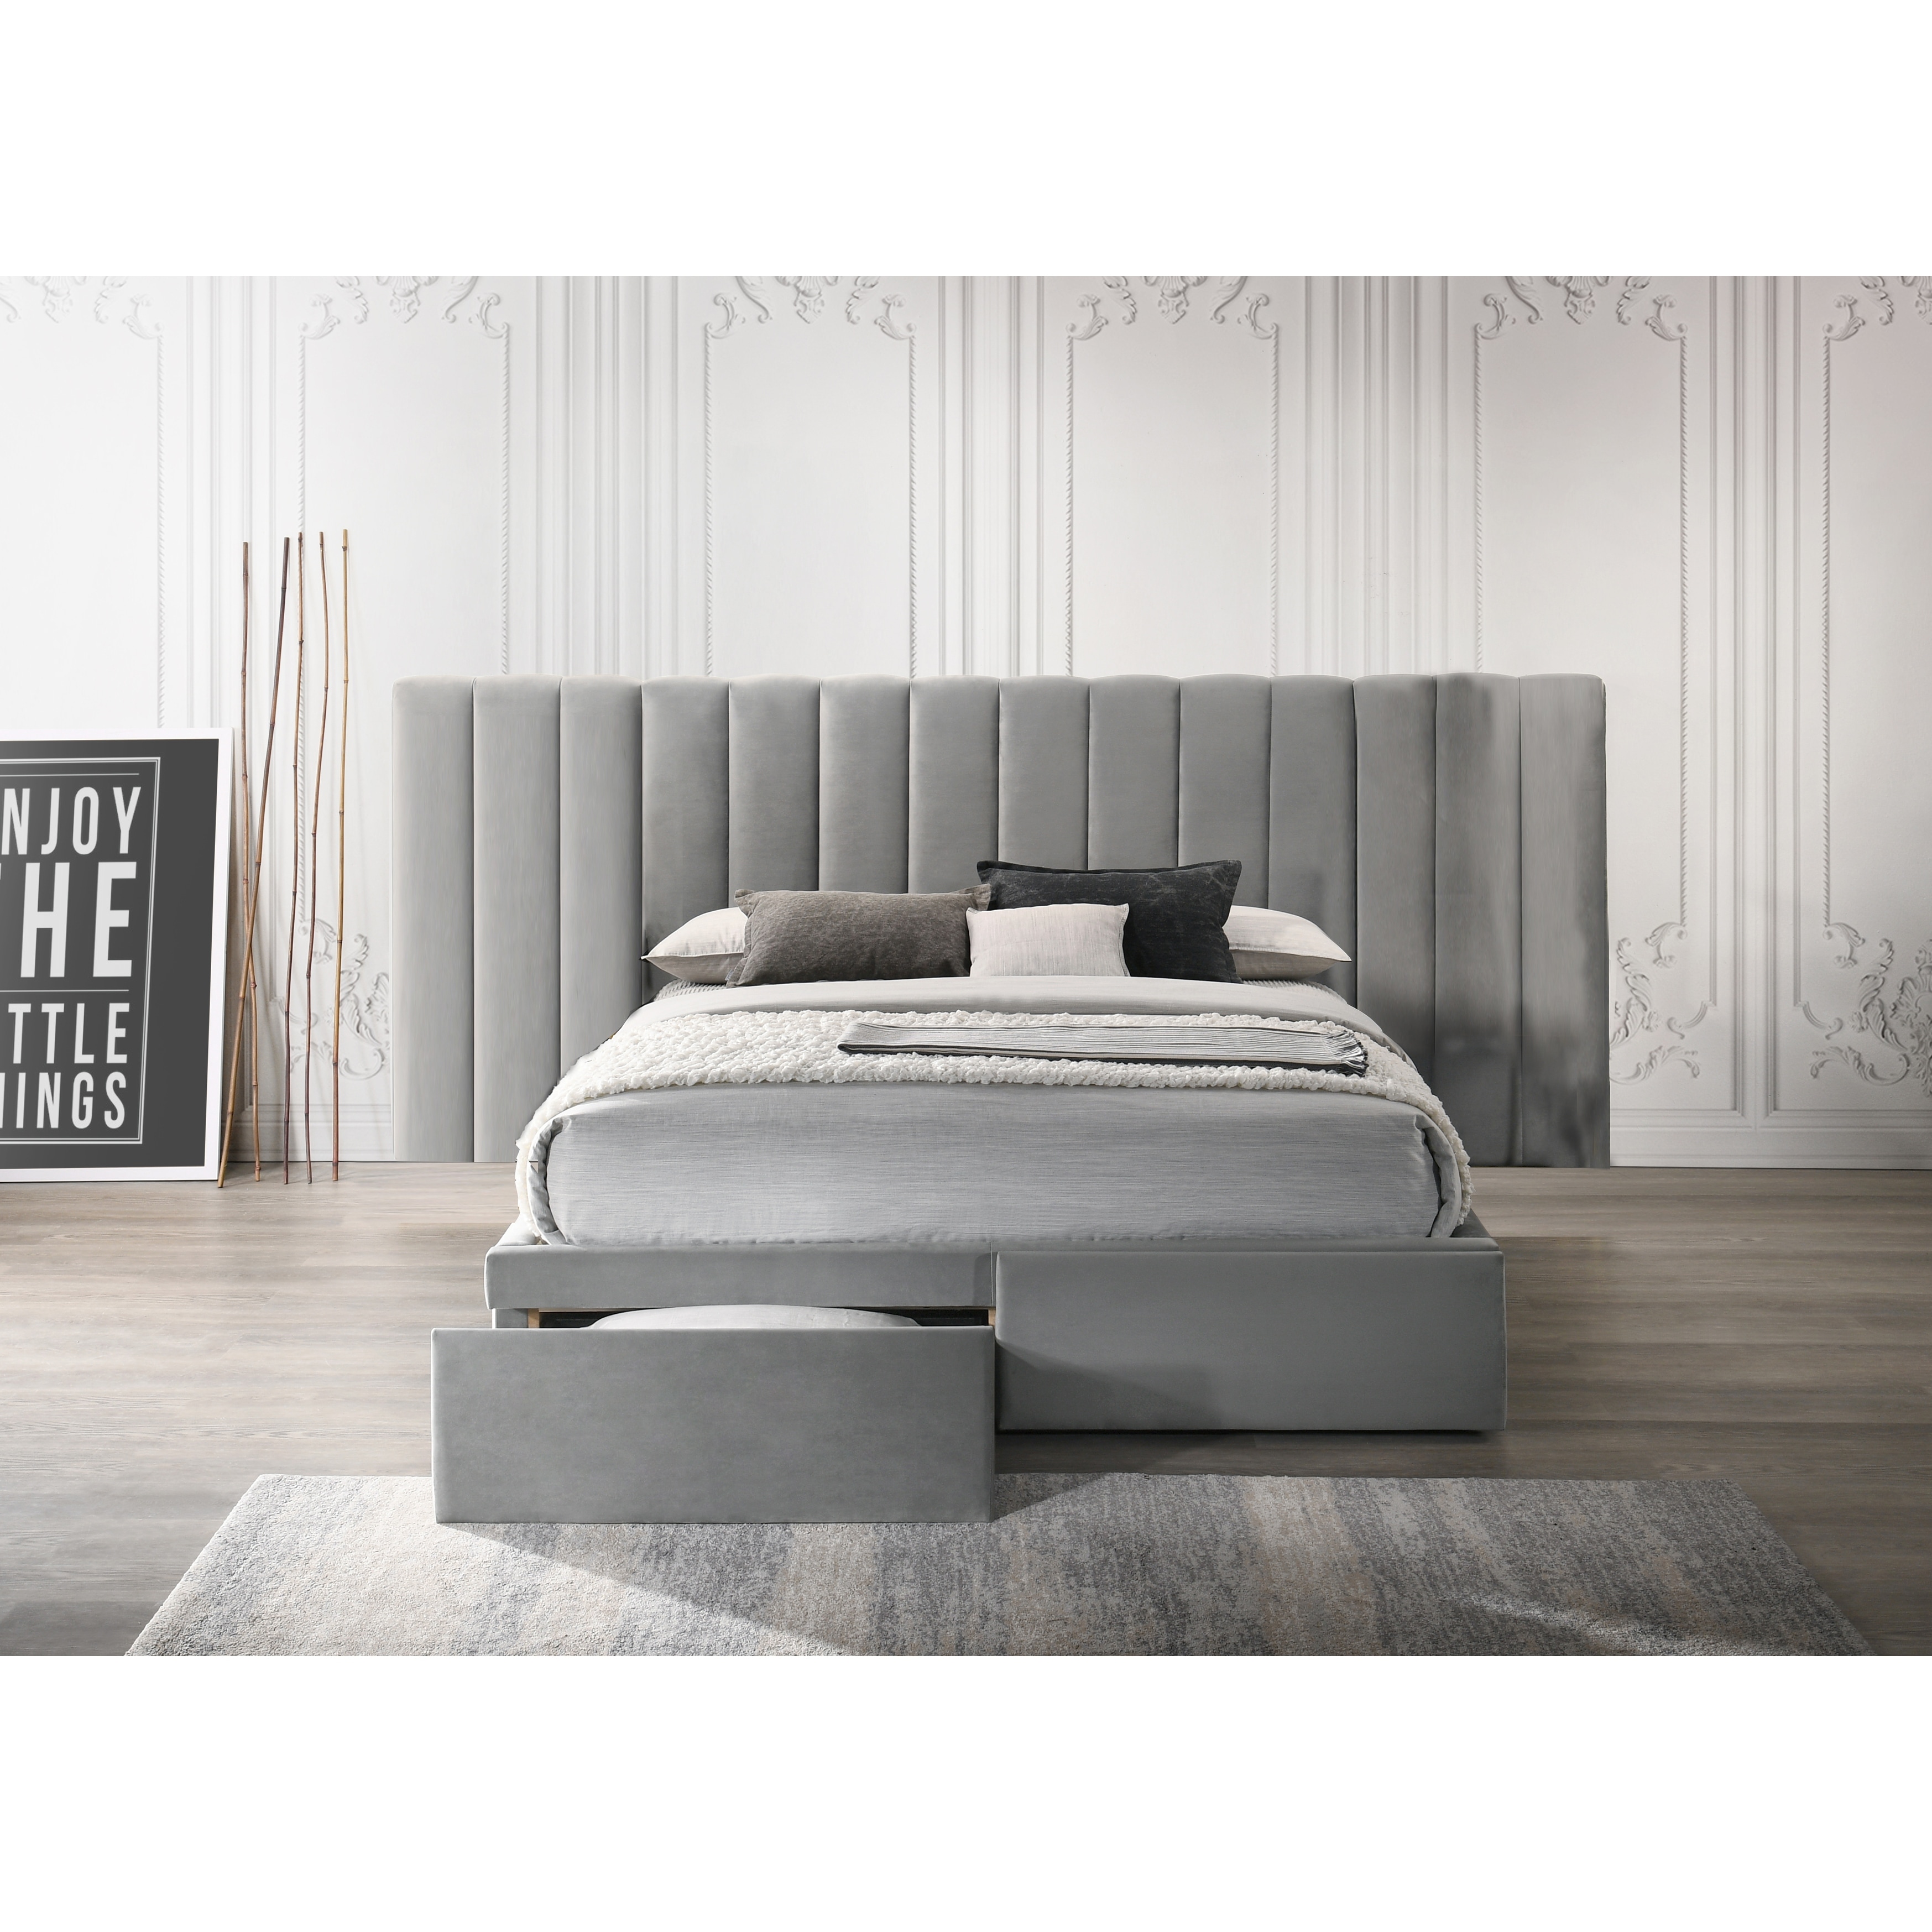 Grey King Size Headboard And Frame - pic-noodle